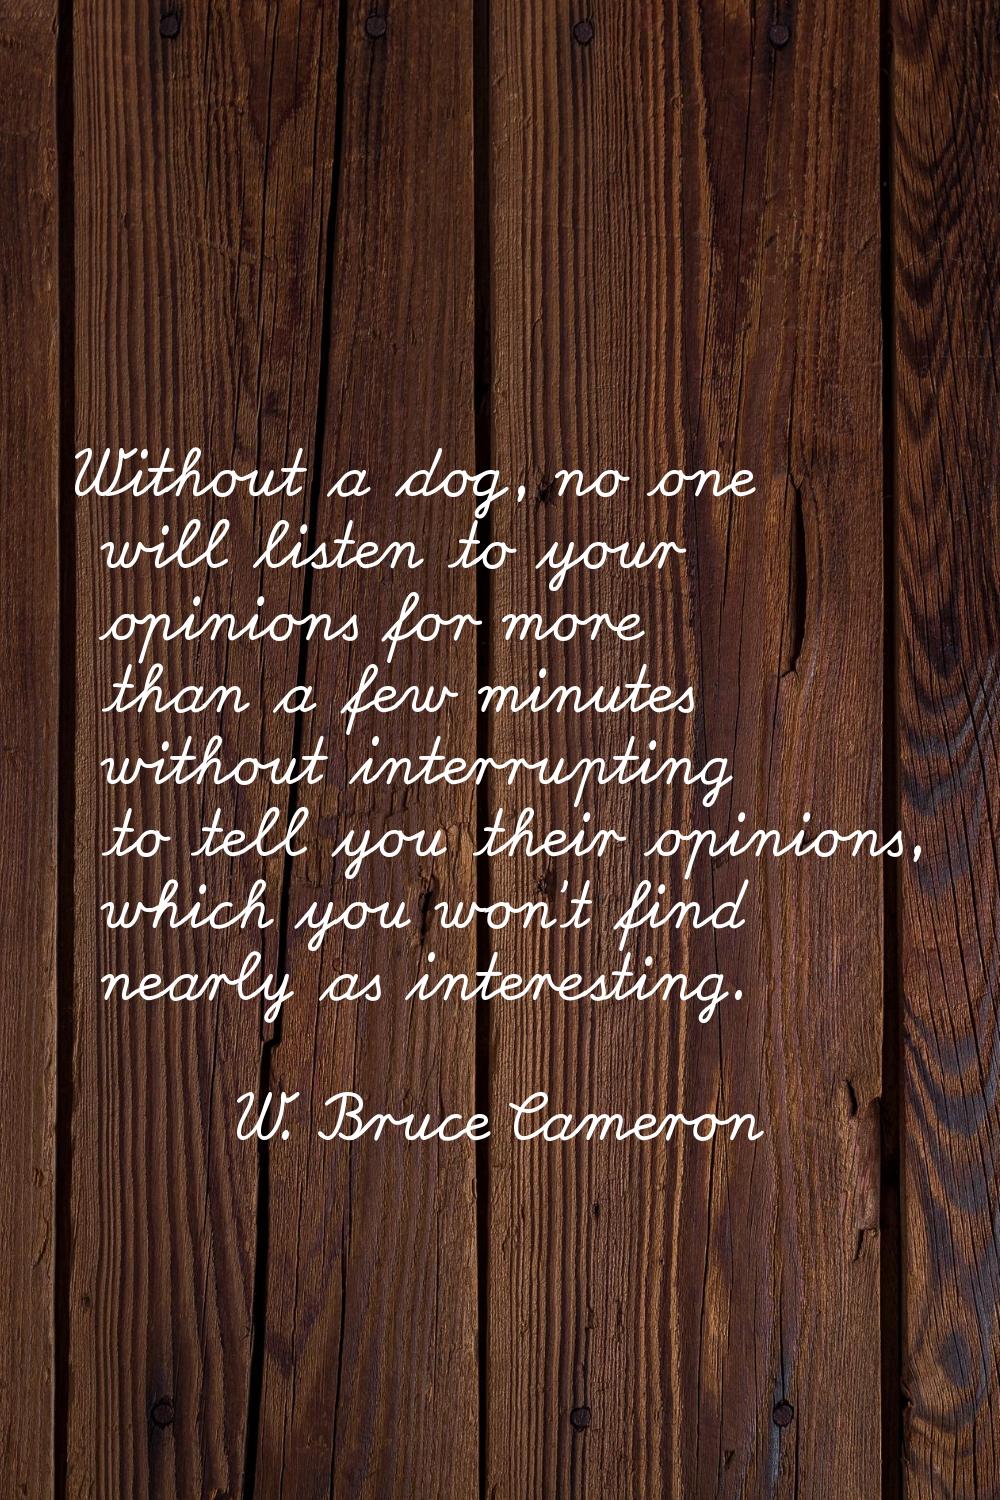 Without a dog, no one will listen to your opinions for more than a few minutes without interrupting